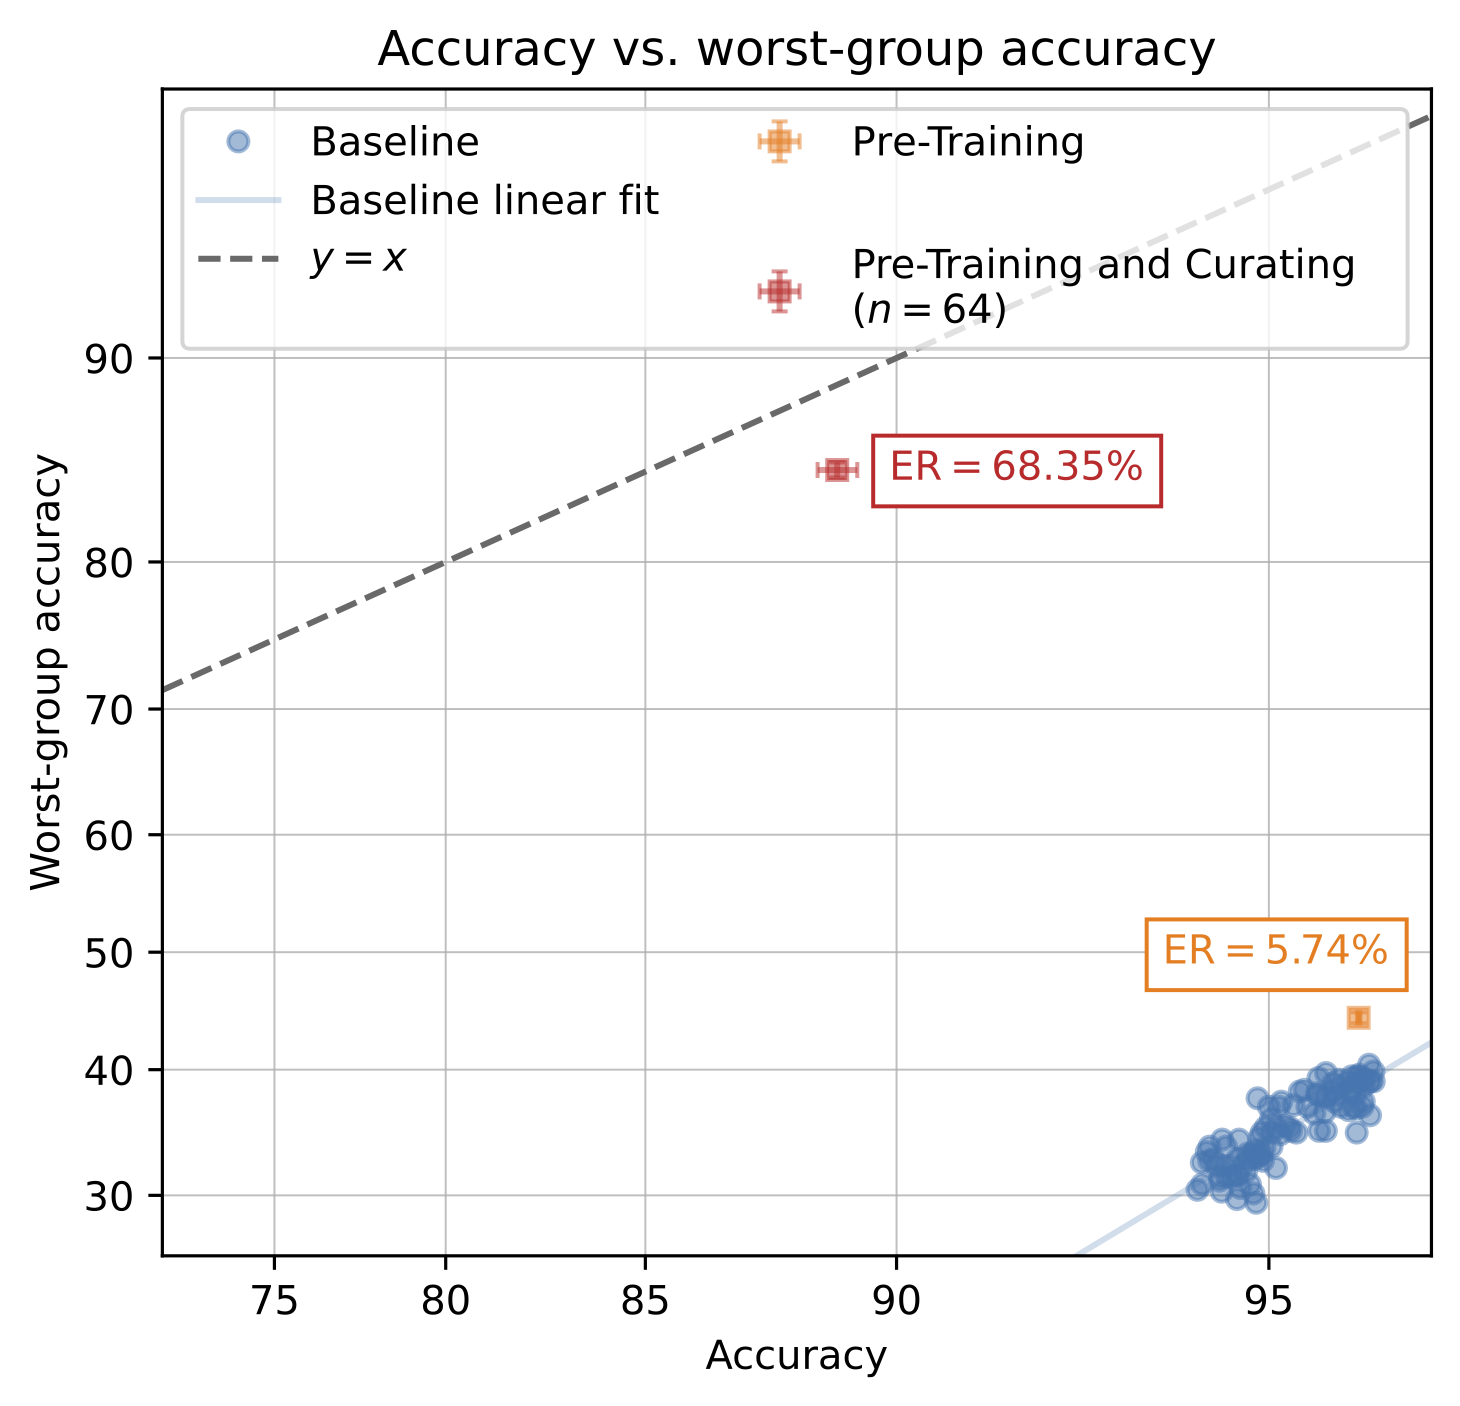 A scatterplot of accuracy vs. worst-group accuracy for models trained from scratch on CelebA, pre-trained models fine-tuned on CelebA, and pre-trained models fine-tuned on our curated dataset